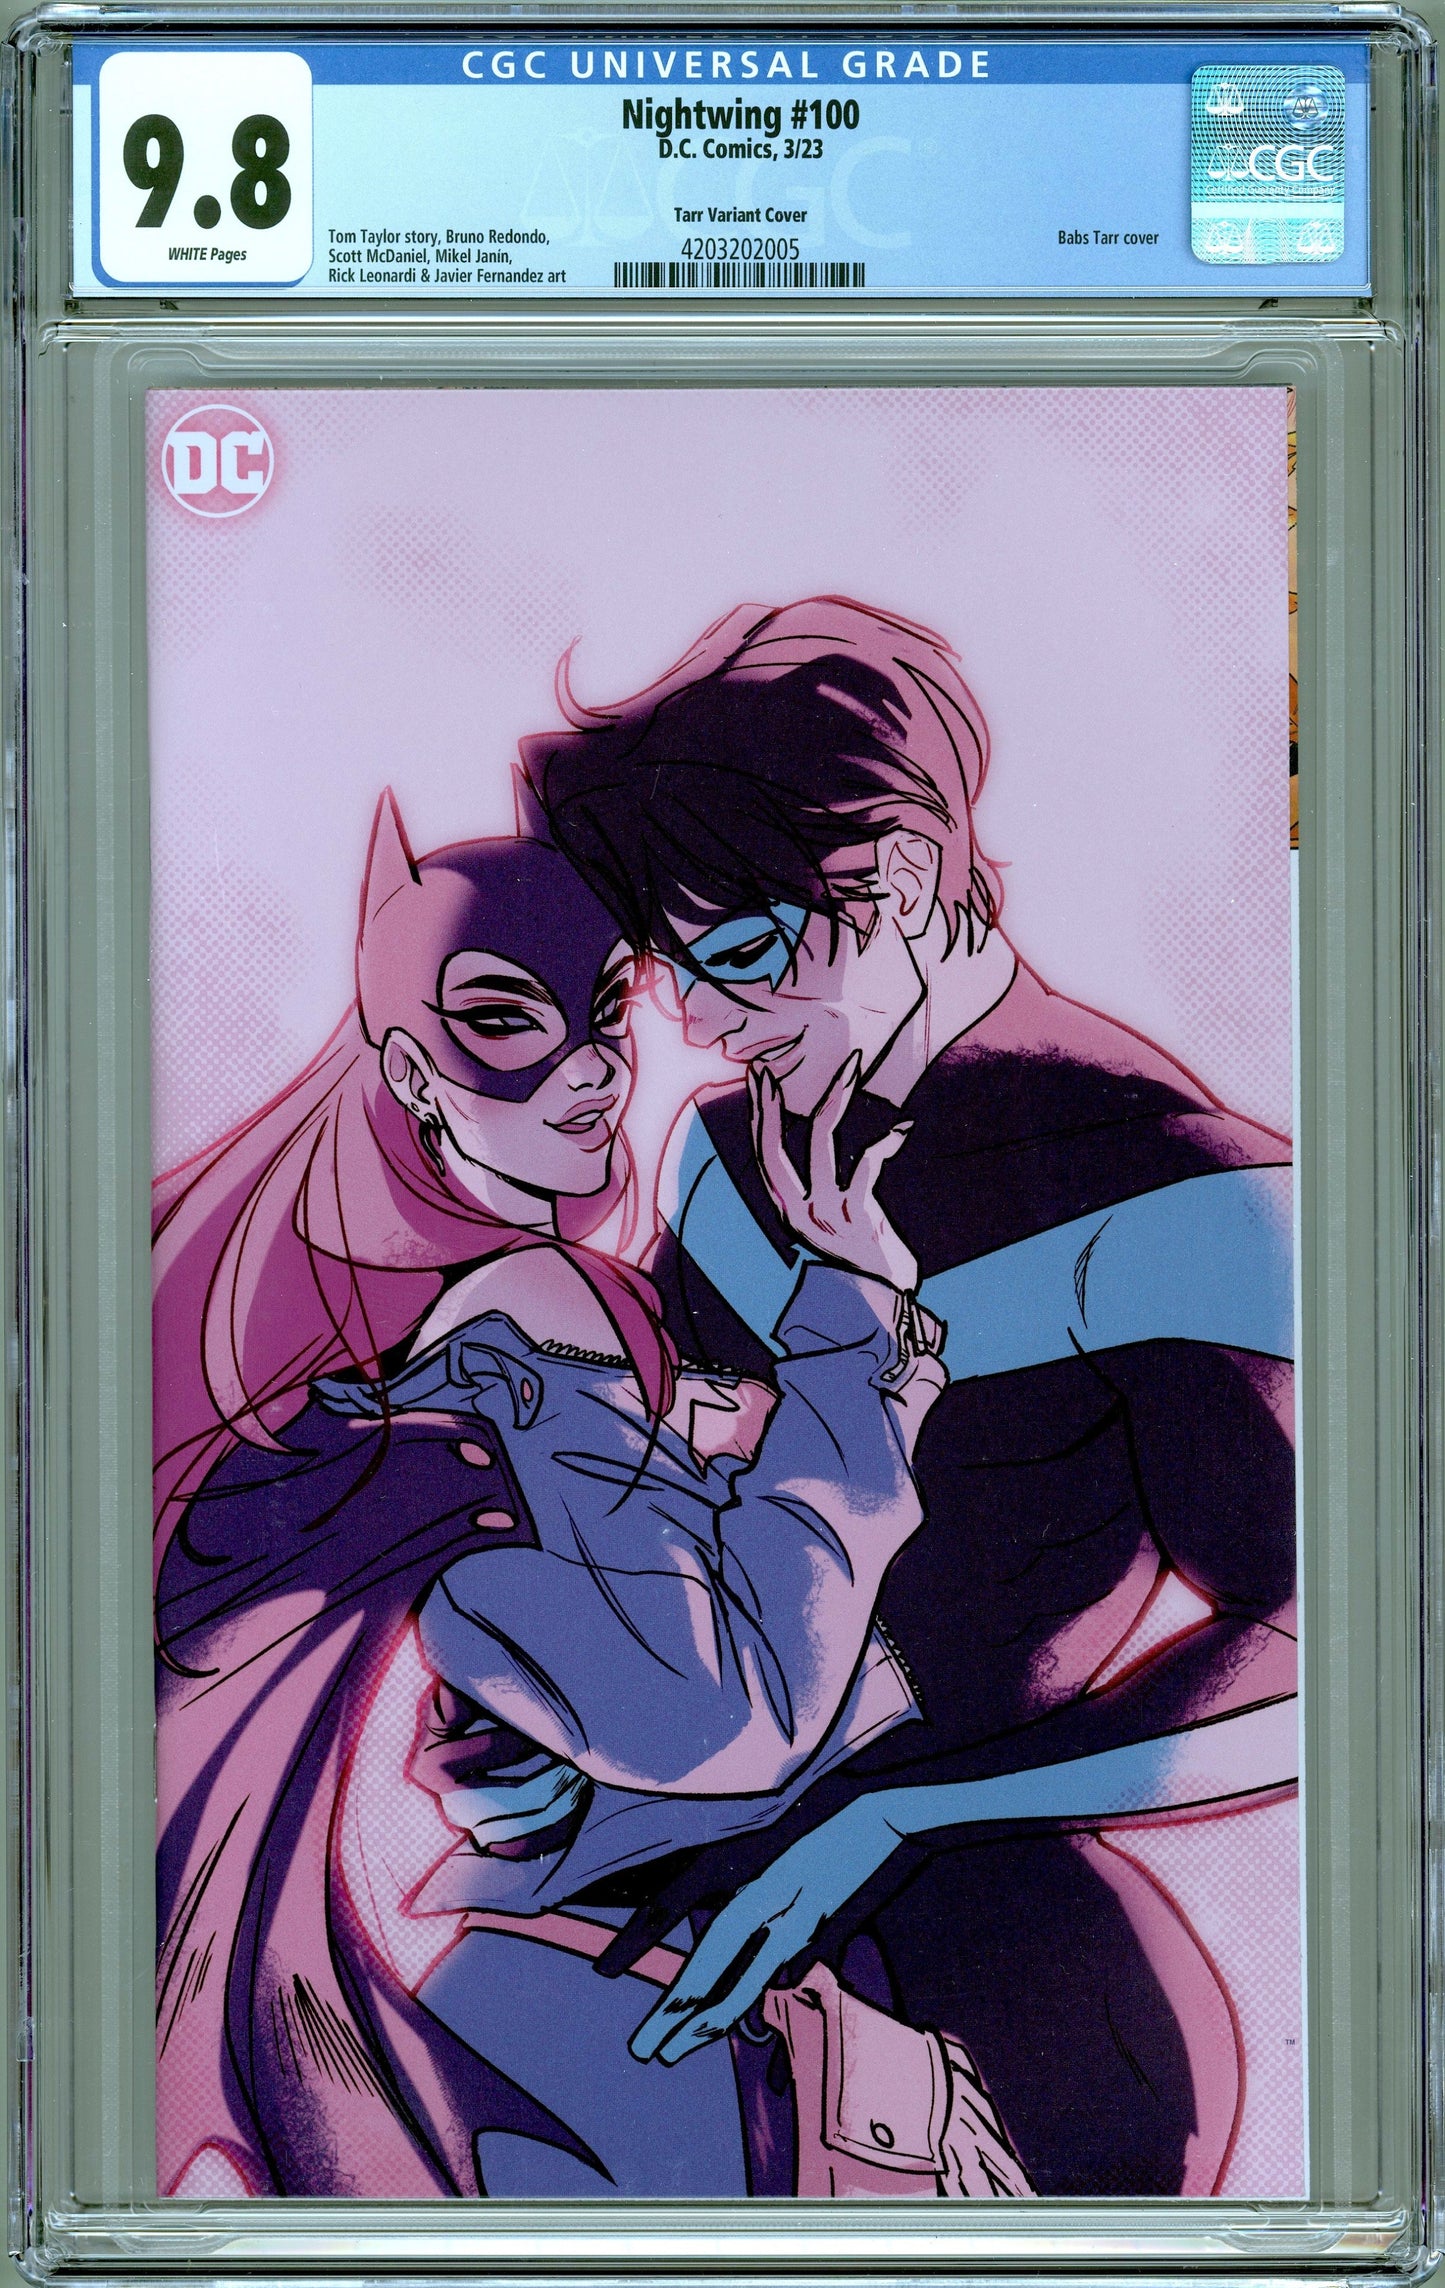 Nightwing #100. The Babs Tarr 1:25 Variant Cover. CGC 9.8